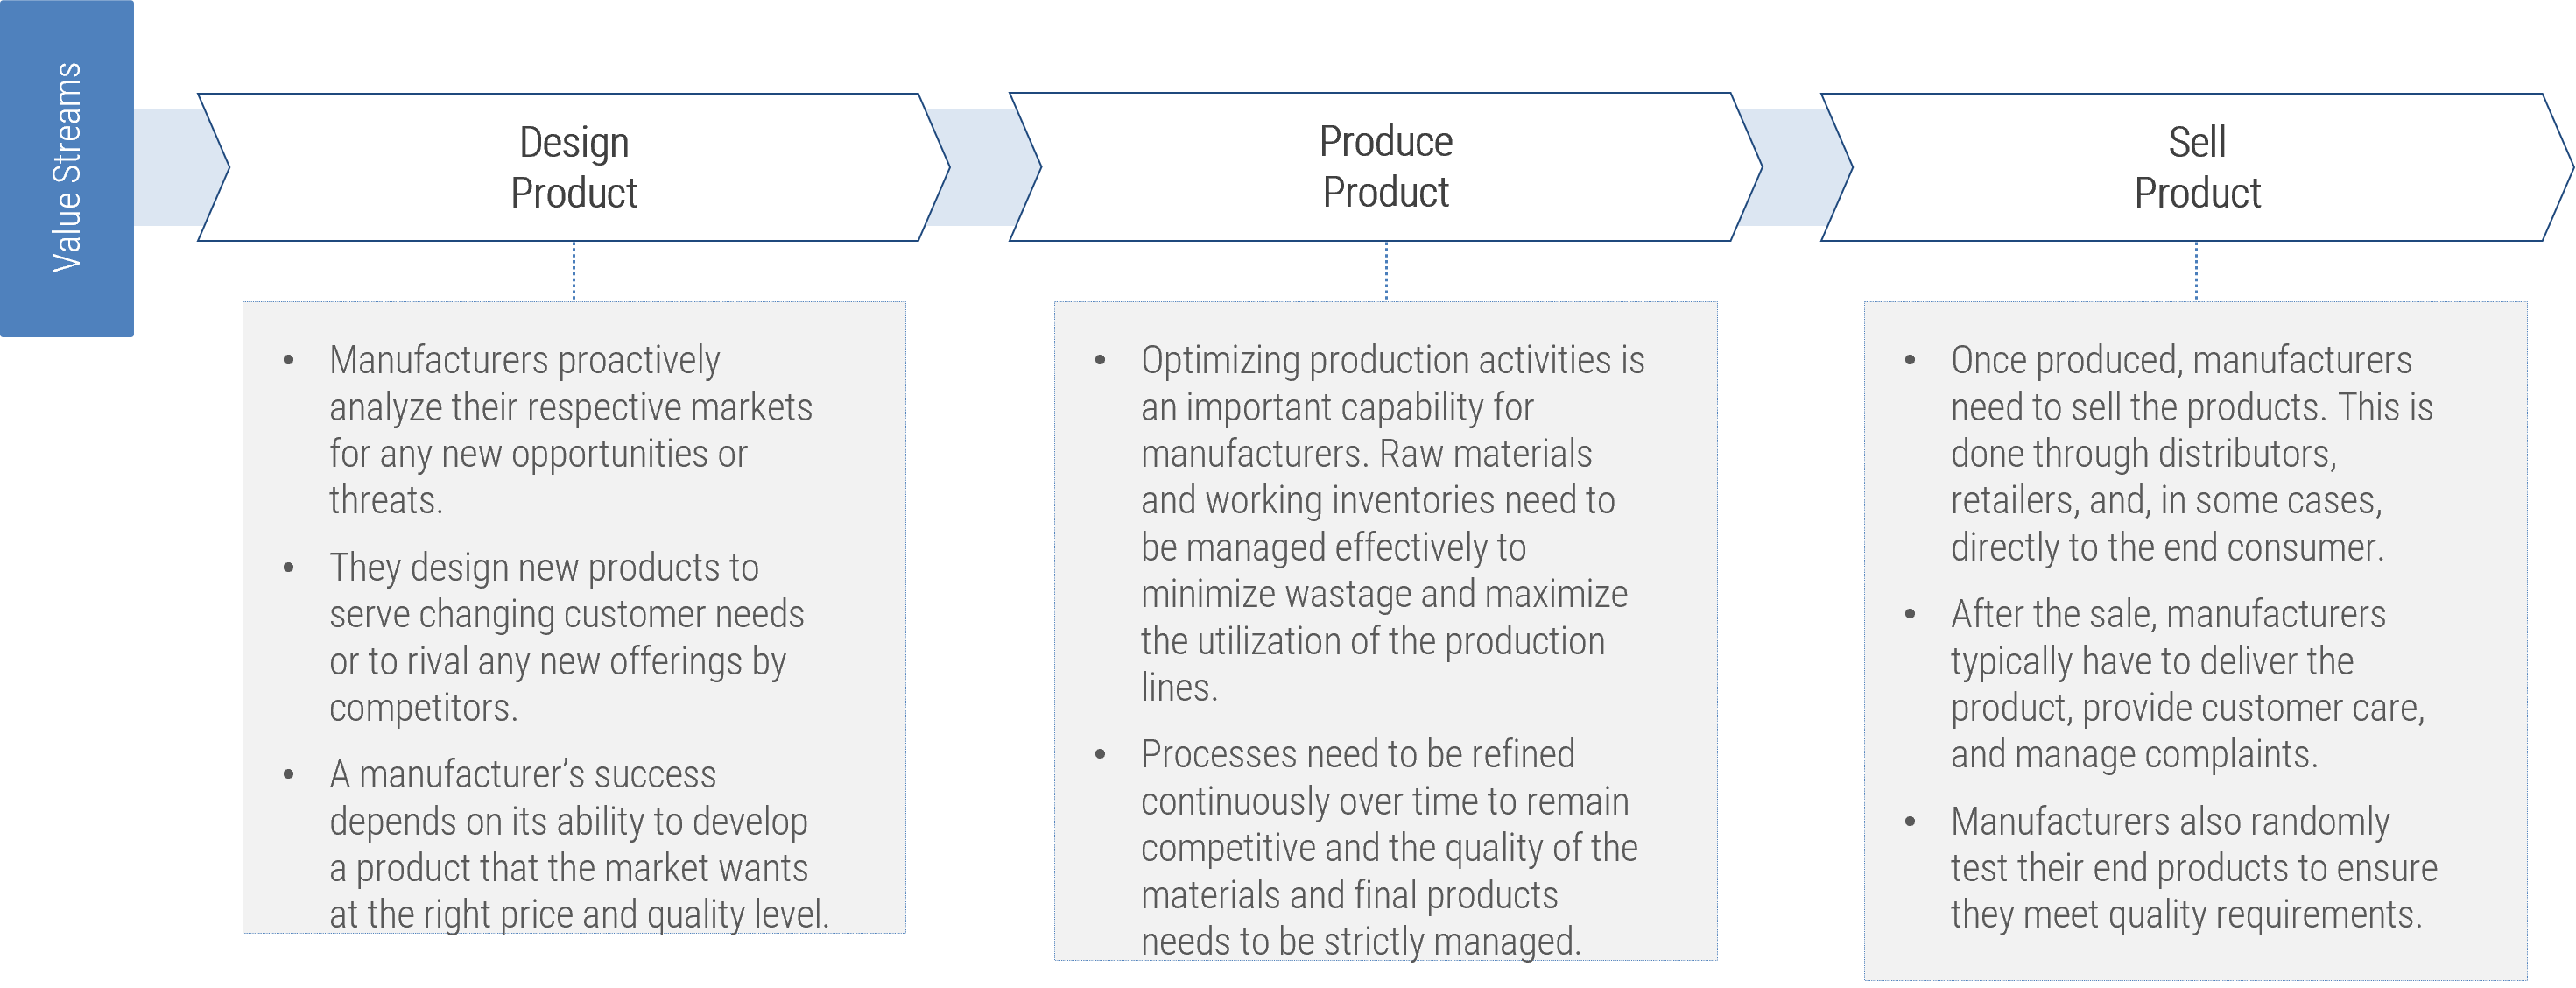 Example Value Stream for Manufacturing with three value chains. 'Design Product: Manufacturers proactively analyze their respective markets for any new opportunities or threats; They design new products to serve changing customer needs or to rival any new offerings by competitors; A manufacturer’s success depends on its ability to develop a product that the market wants at the right price and quality level.' 'Produce Product: Optimizing production activities is an important capability for manufacturers. Raw materials and working inventories need to be managed effectively to minimize wastage and maximize the utilization of the production lines; Processes need to be refined continuously over time to remain competitive and the quality of the materials and final products needs to be strictly managed.' 'Sell Product: Once produced, manufacturers need to sell the products. This is done through distributors, retailers, and, in some cases, directly to the end consumer; After the sale, manufacturers typically have to deliver the product, provide customer care, and manage complaints; Manufacturers also randomly test their end products to ensure they meet quality requirements.'